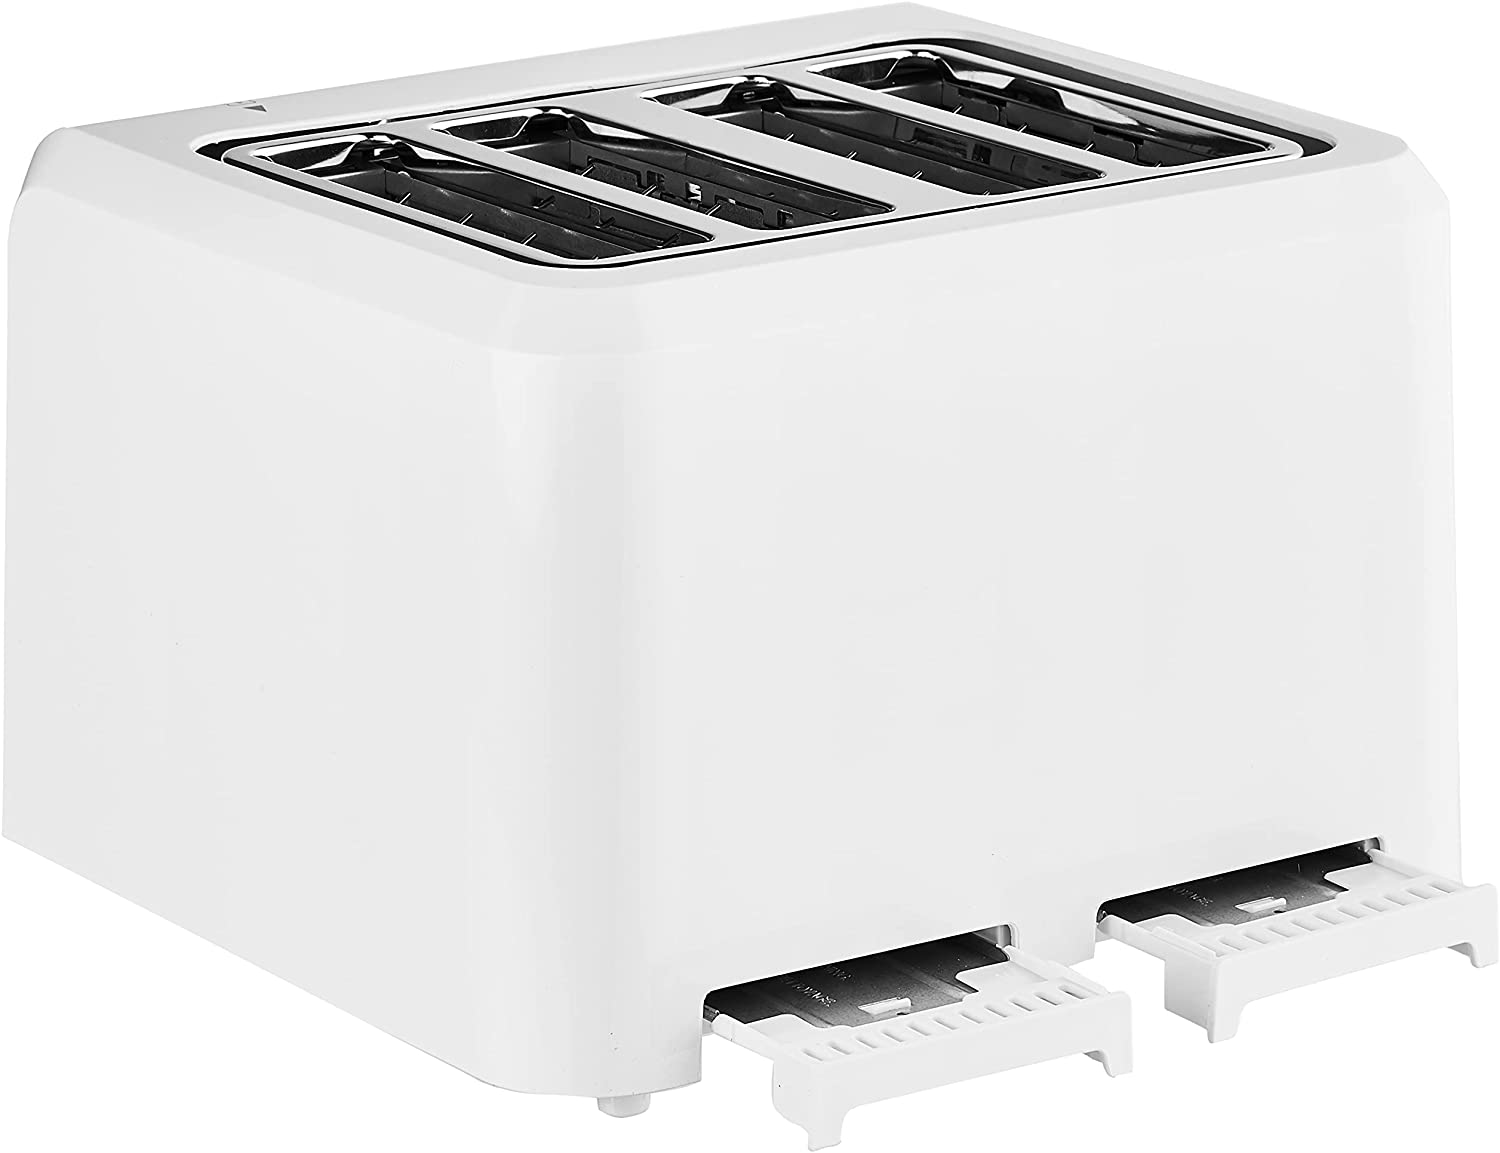 Cuisinart CPT-142FR Plastic 4 Slices Toaster White - Certified Refurbished